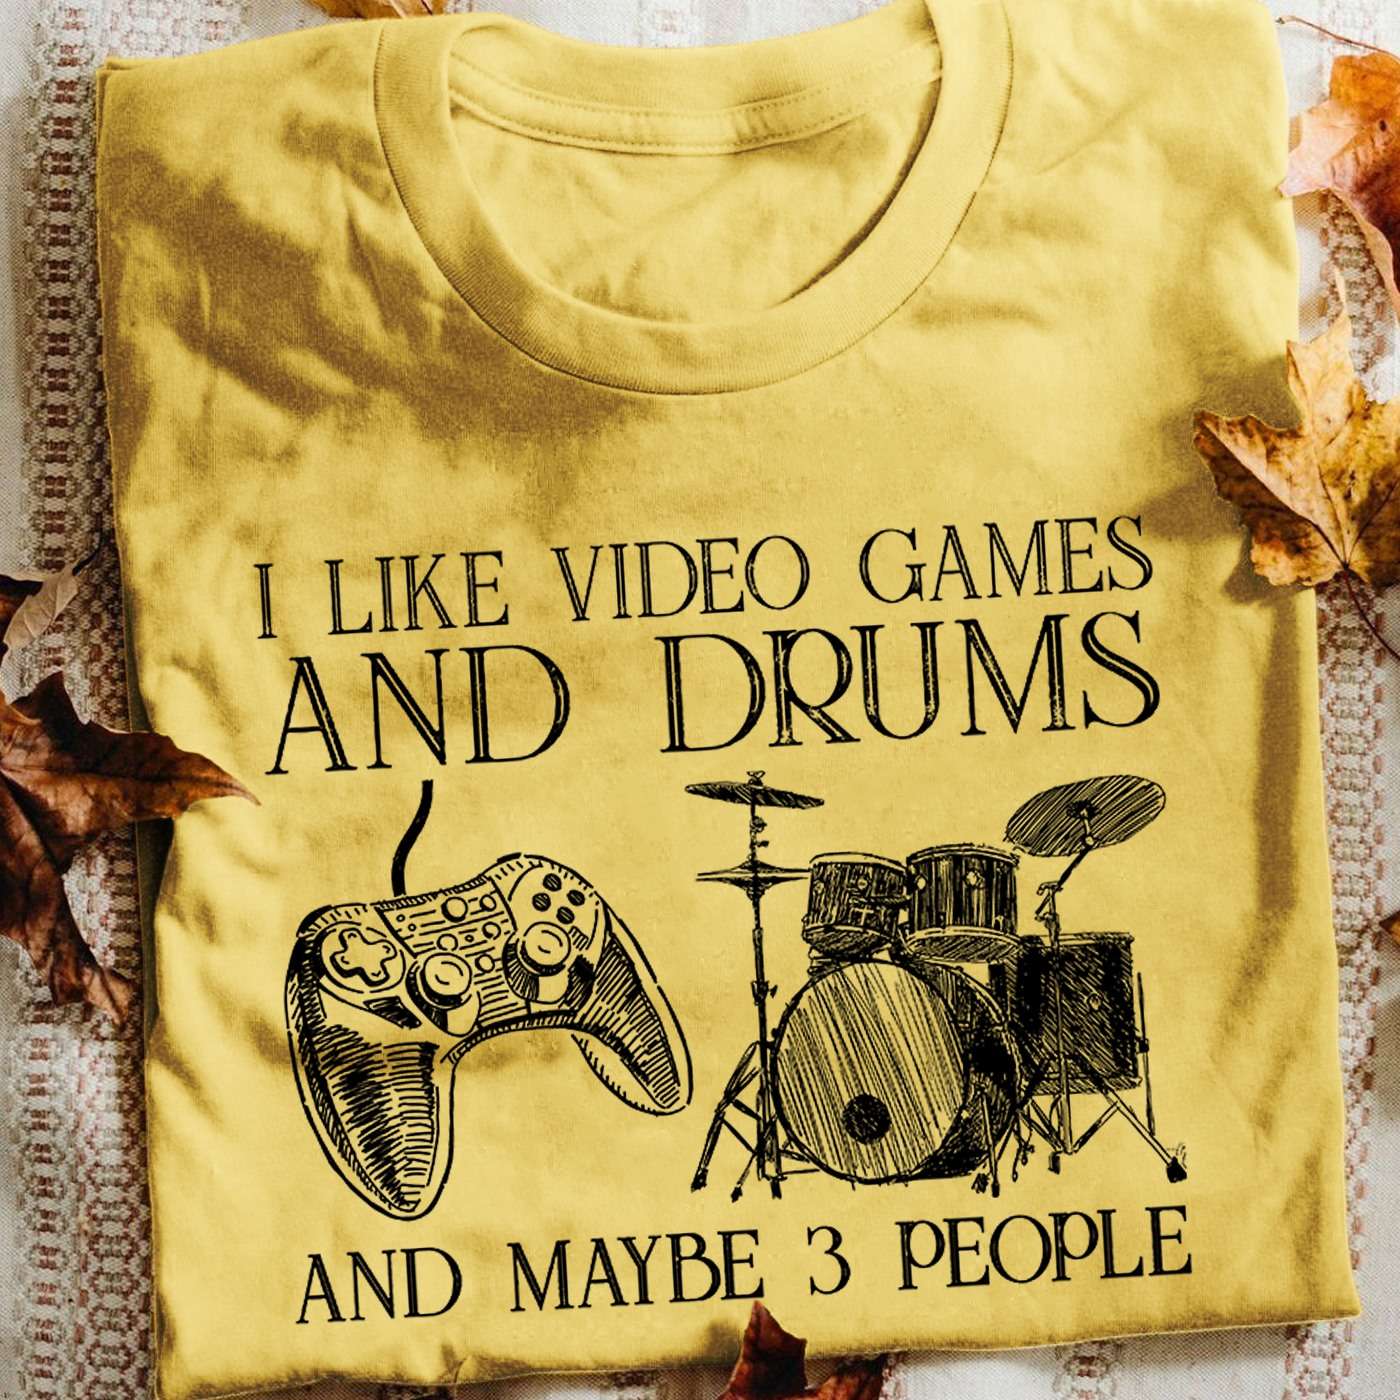 I like video games and drums and maybe 3 people - The drummer